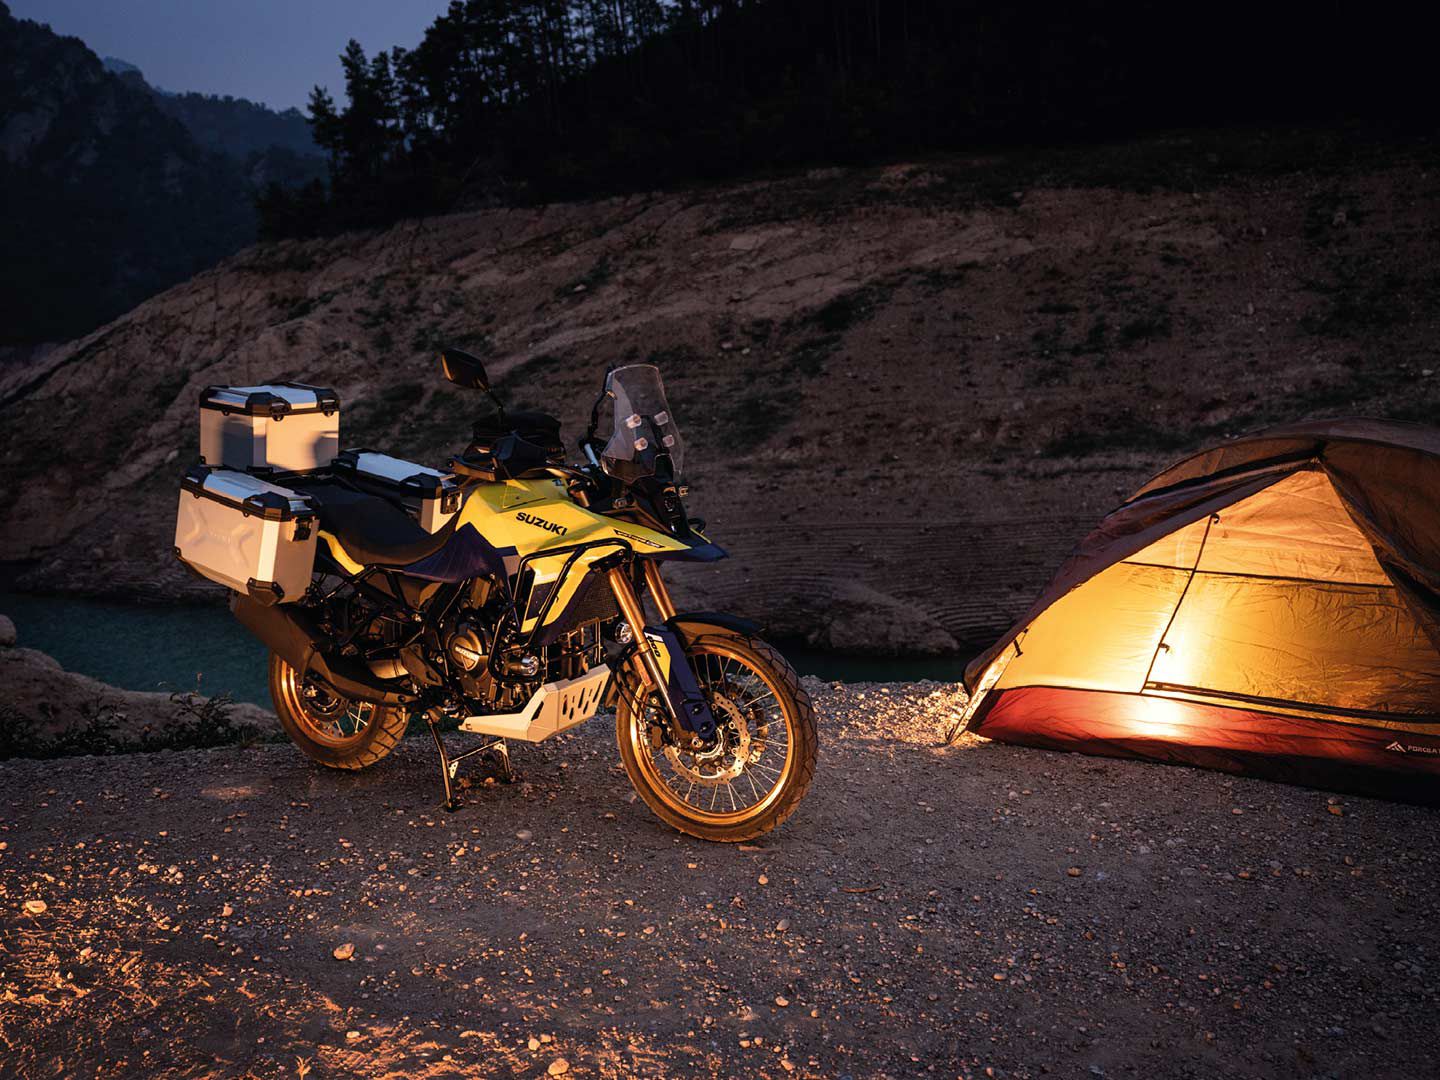 With the 800DE, Suzuki looks to offer a more adventure-worthy option to the growing legion of adventure bike riders.